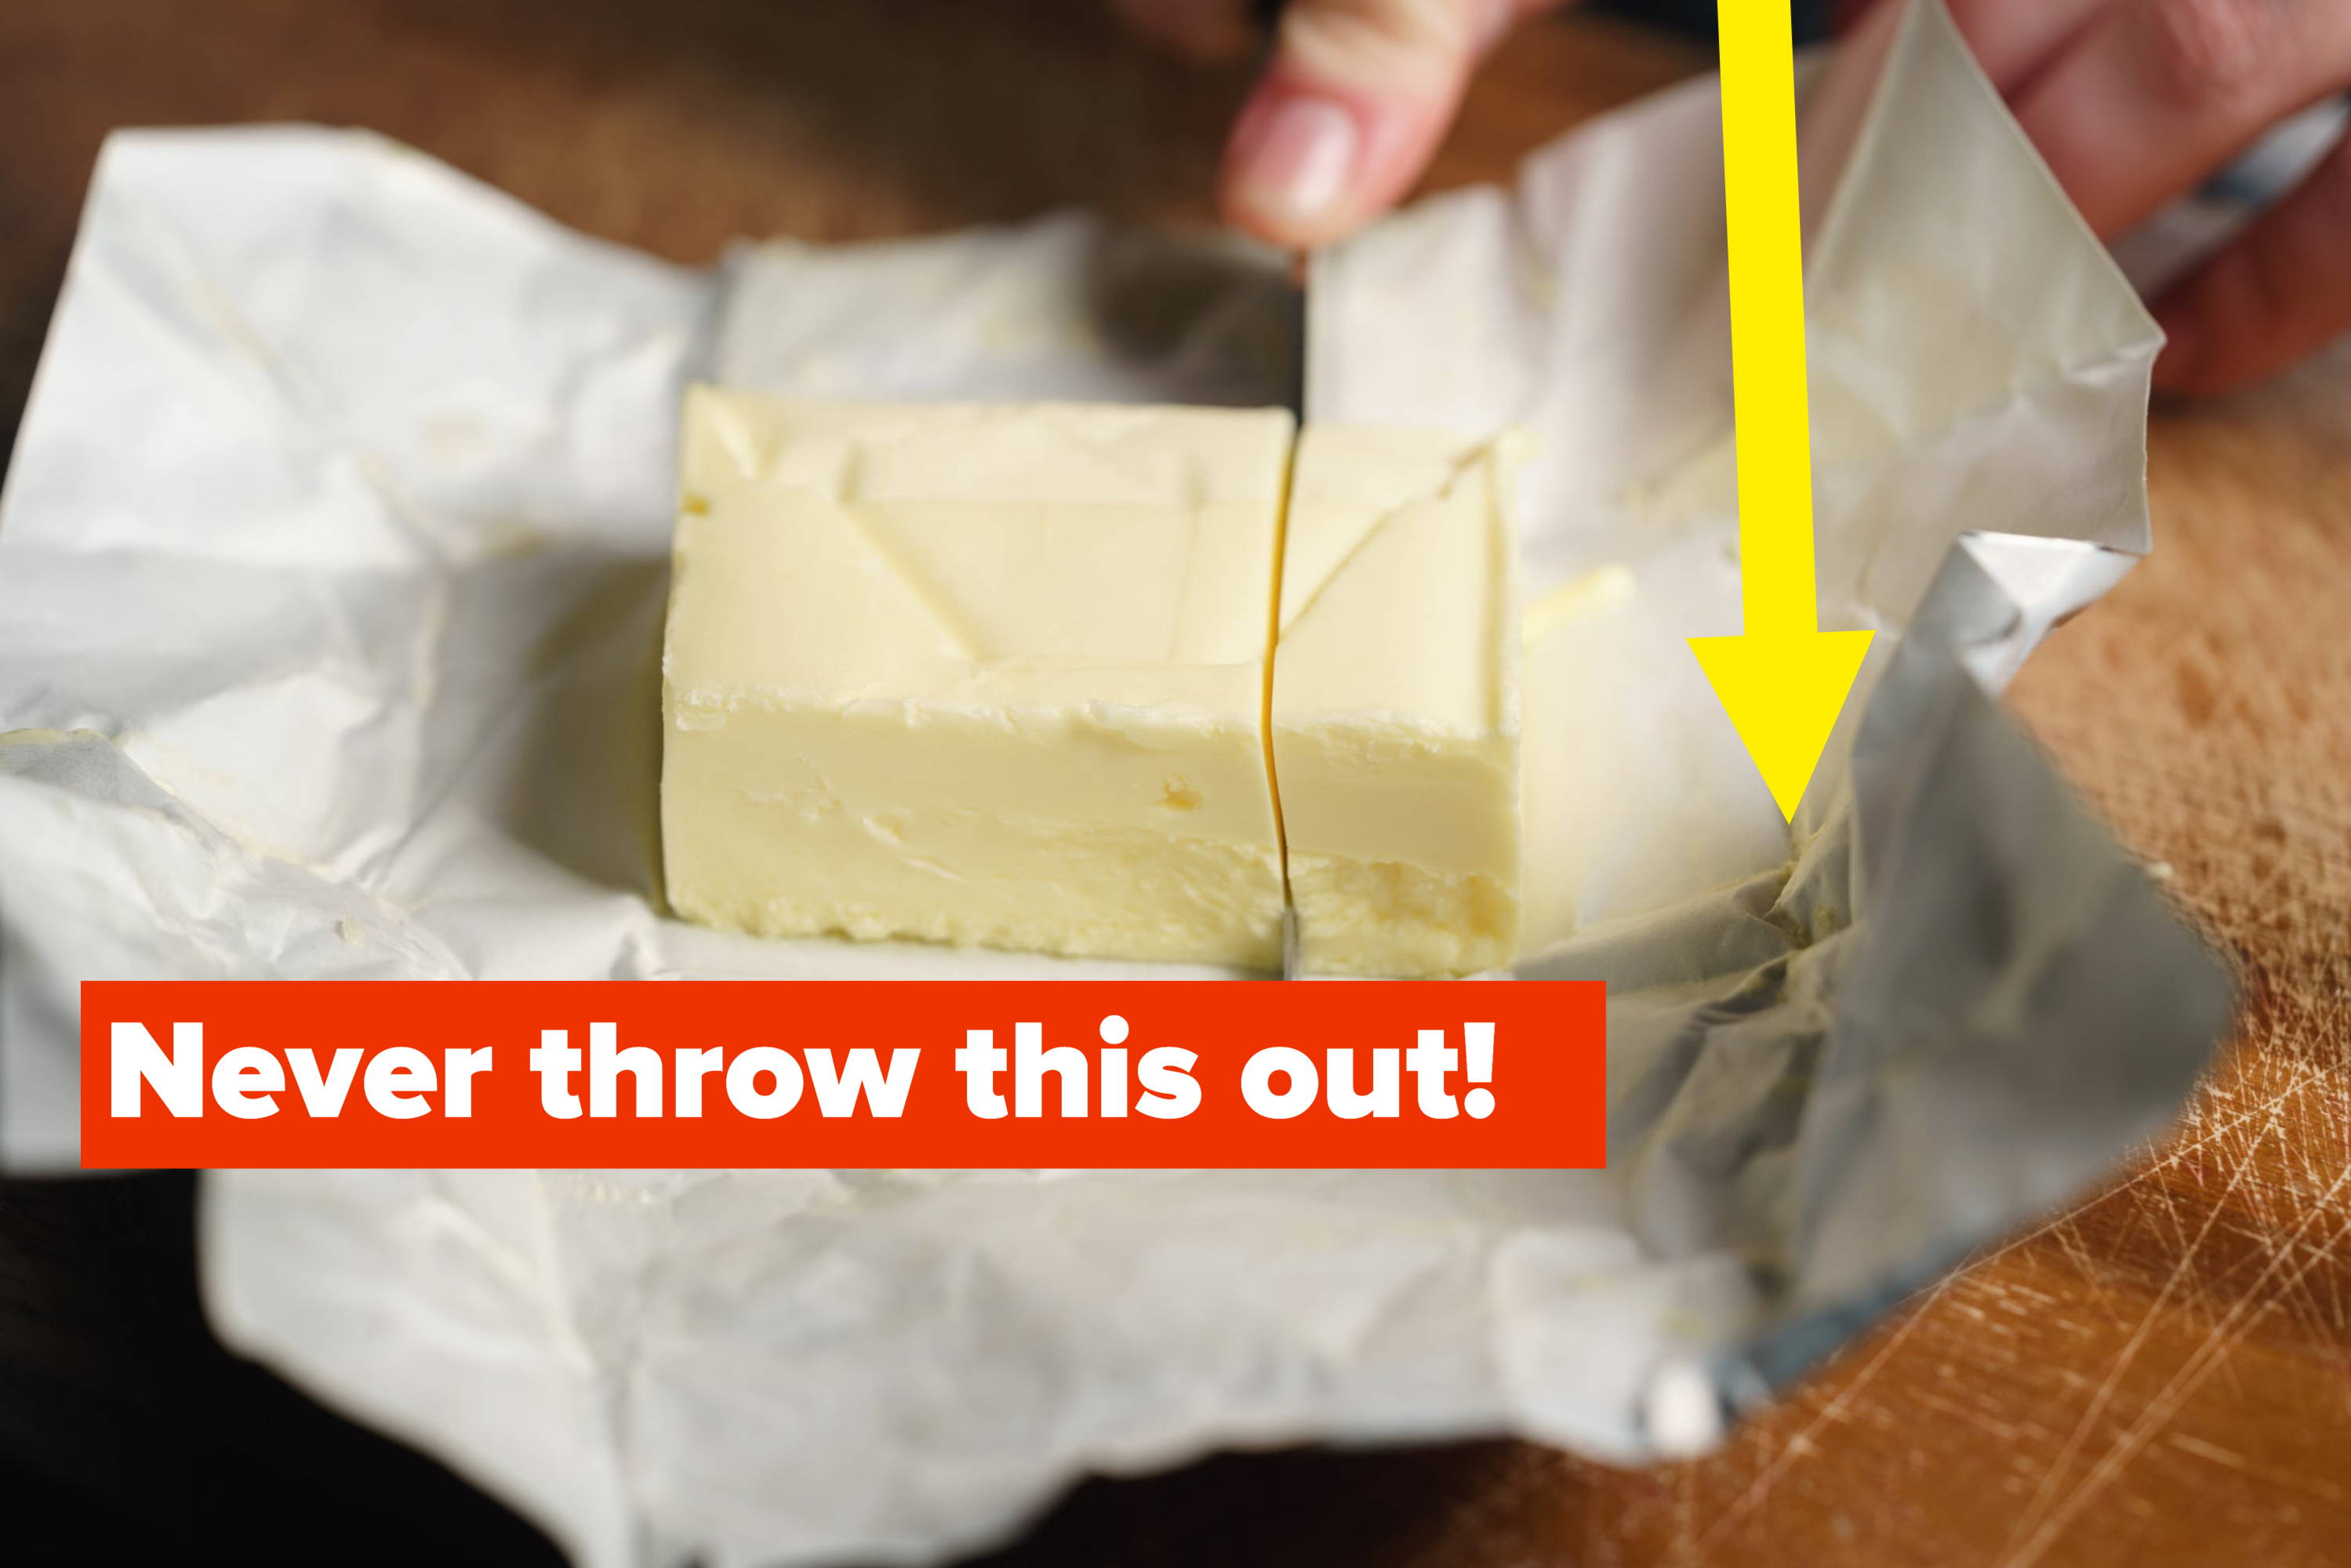 Slicing a butter brick with a knife, with arrow pointing to the wrapping foil with text: &quot;Never throw this out!&quot;